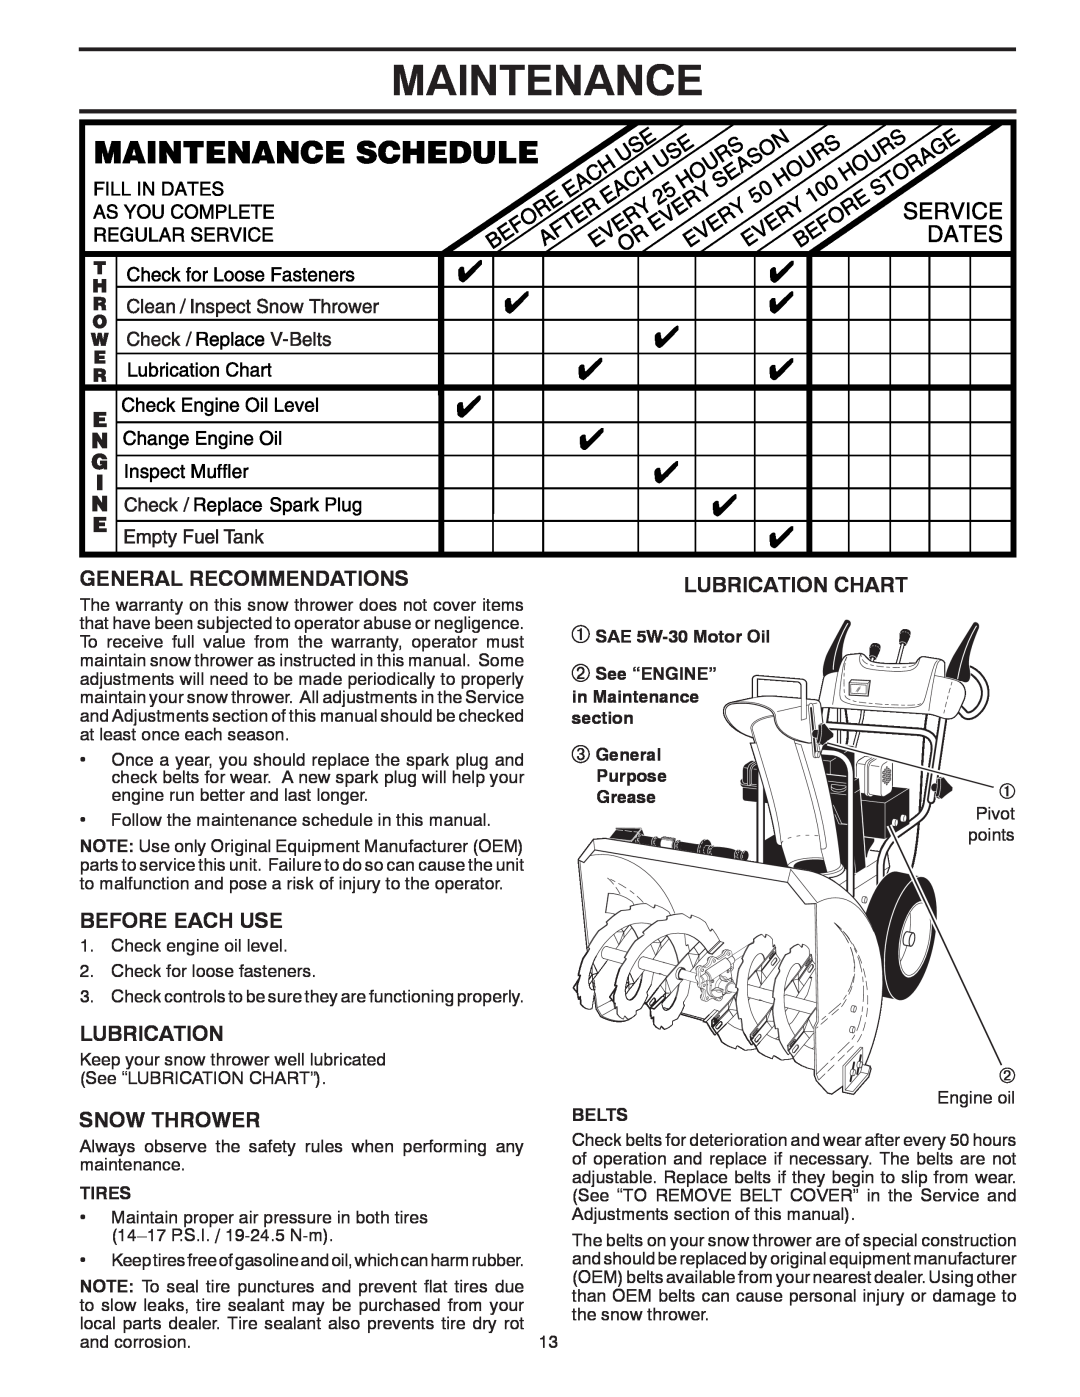 Husqvarna 96193004400 Maintenance, General Recommendations, Before Each Use, Snow Thrower, Lubrication Chart, Tires 